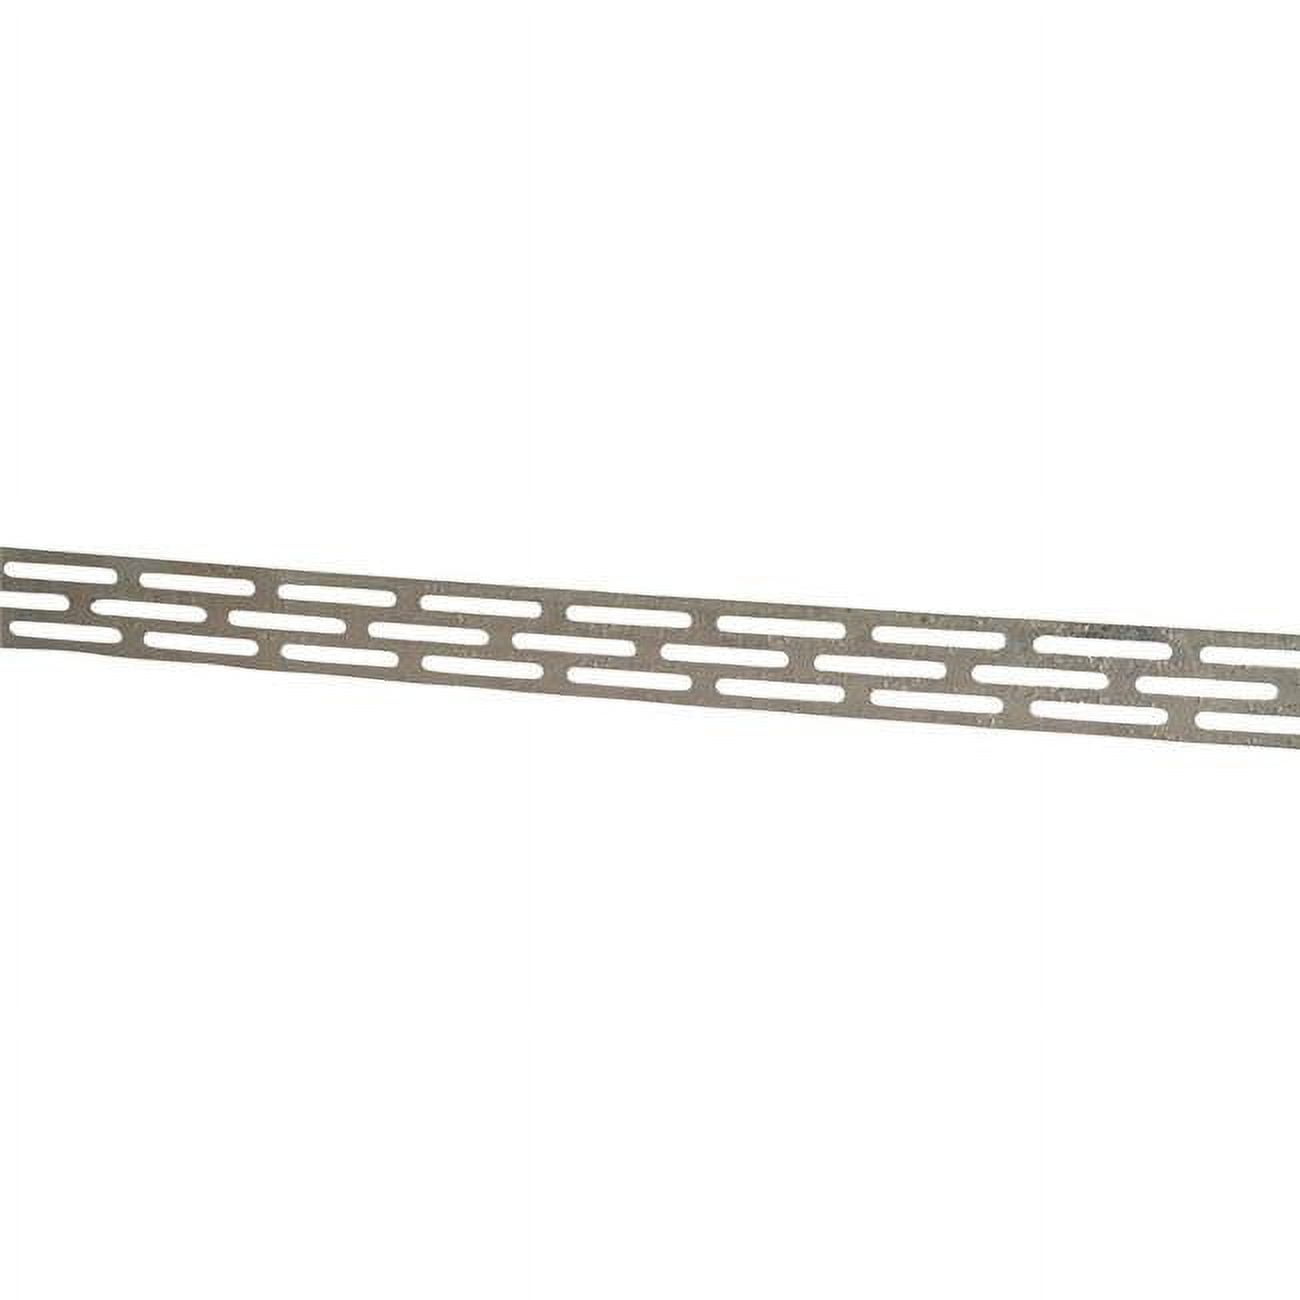 5002887 0.1 X 24 X 2 In. Panel Anchor - 25 Per Pack